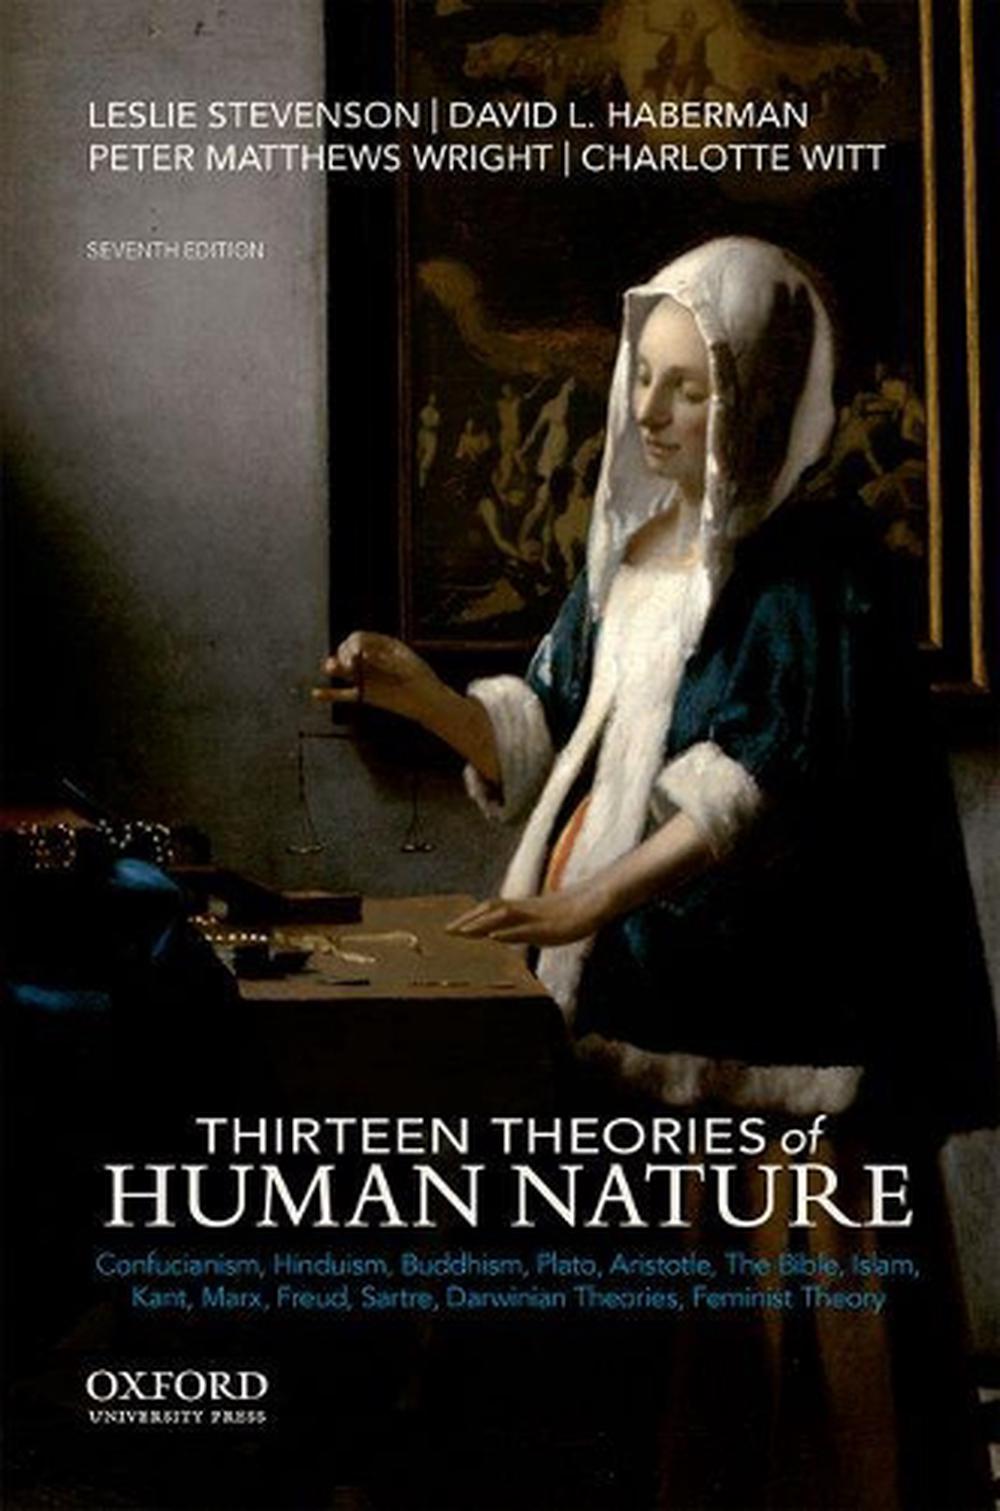 thesis about human nature